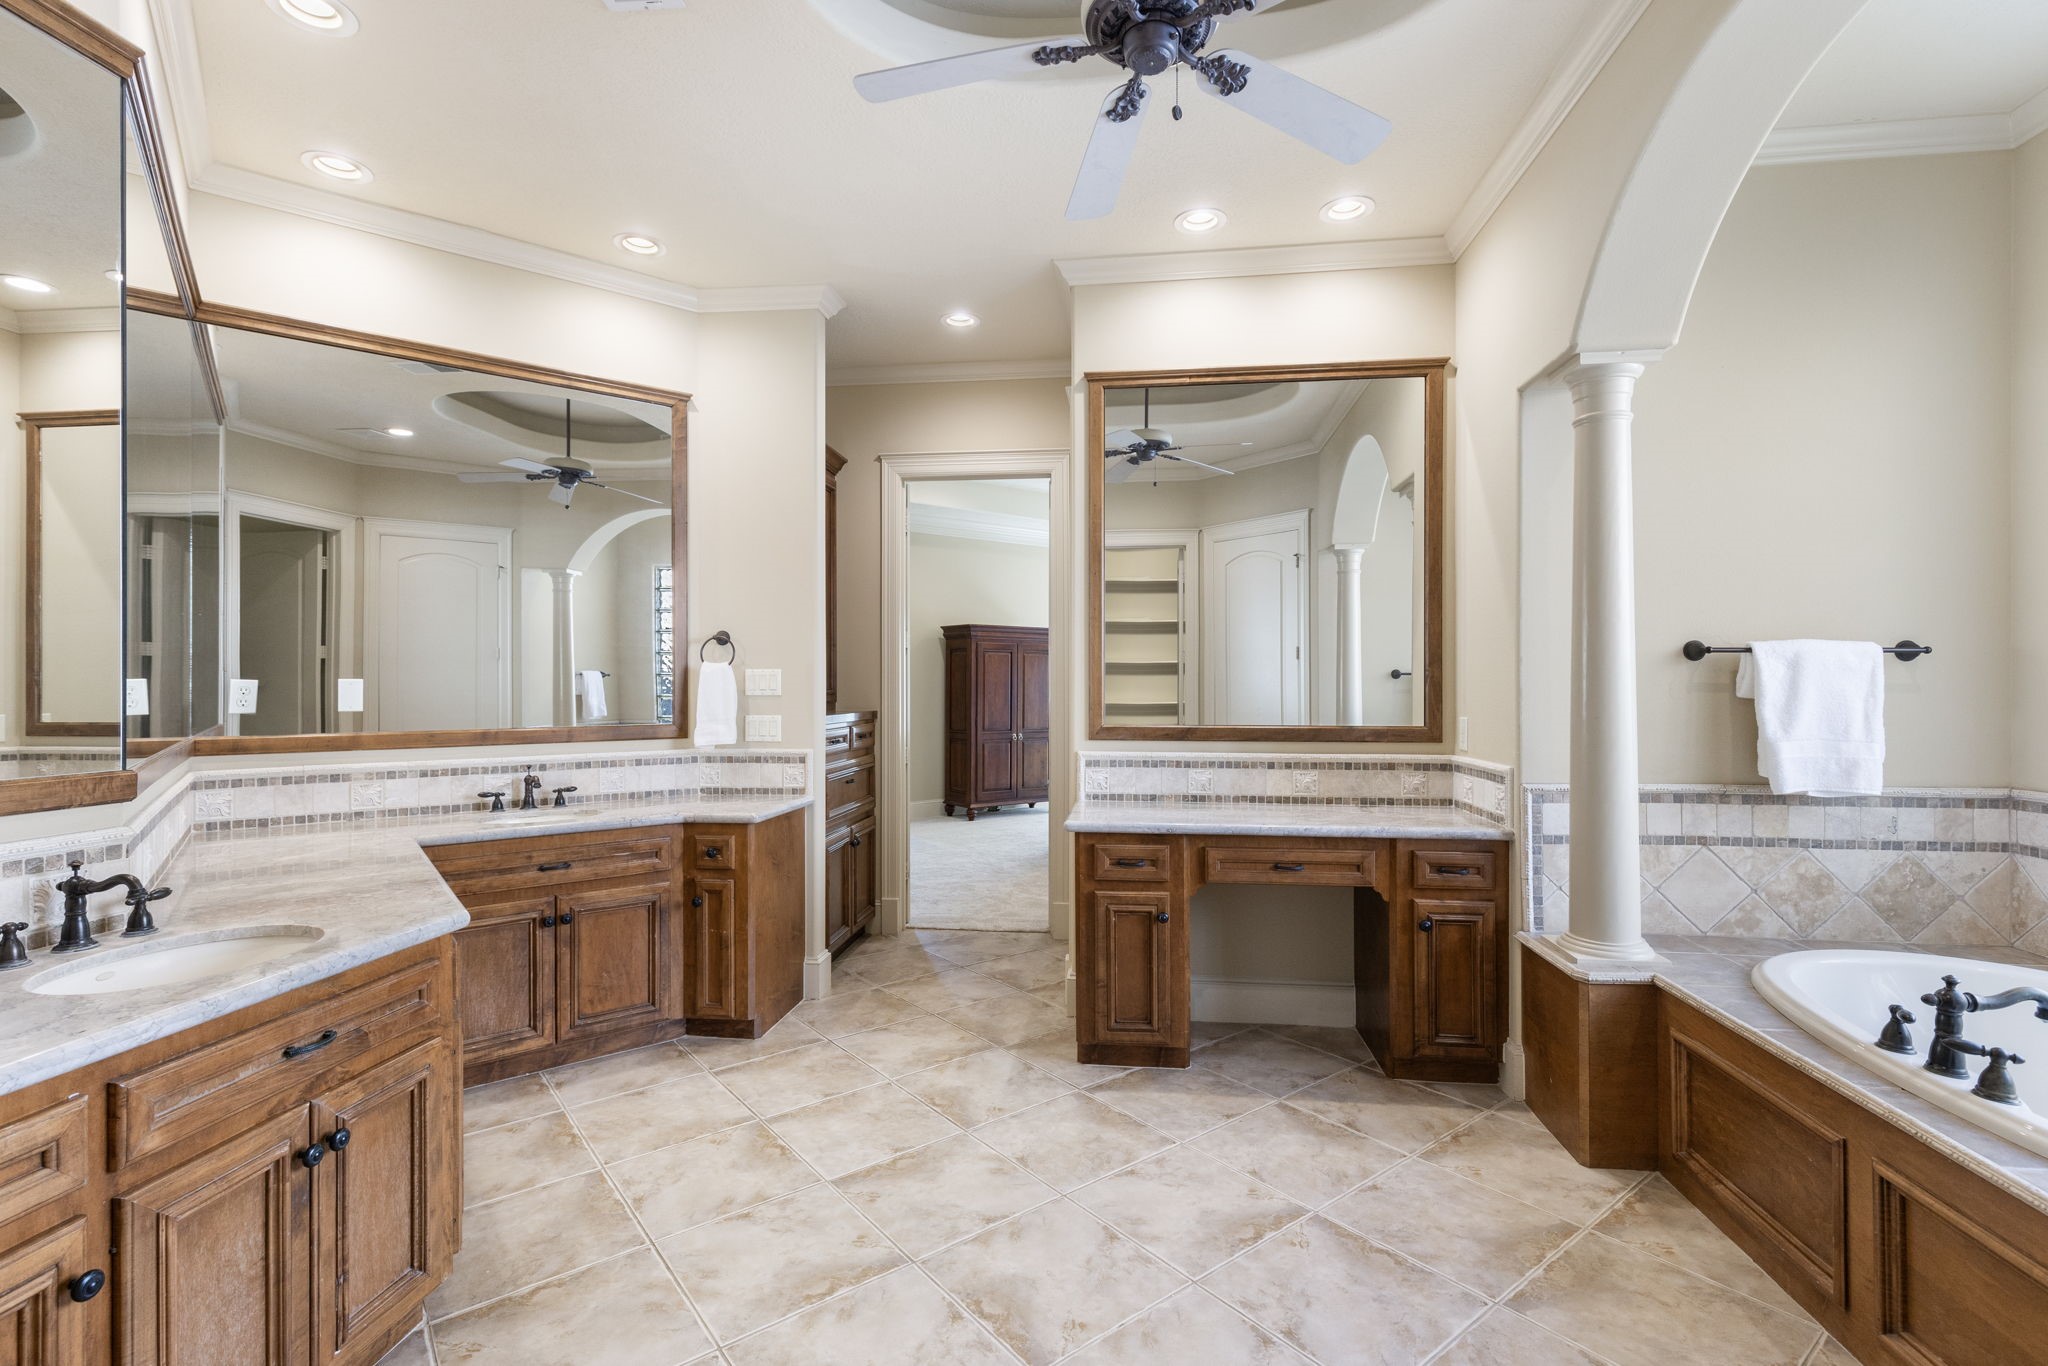 The primary ensuite bathroom features a jetted soaking tub, separate shower, large vanity area with double Kohler sinks, custom cabinetry with a built-in linen storage, LUXE bidet and huge 